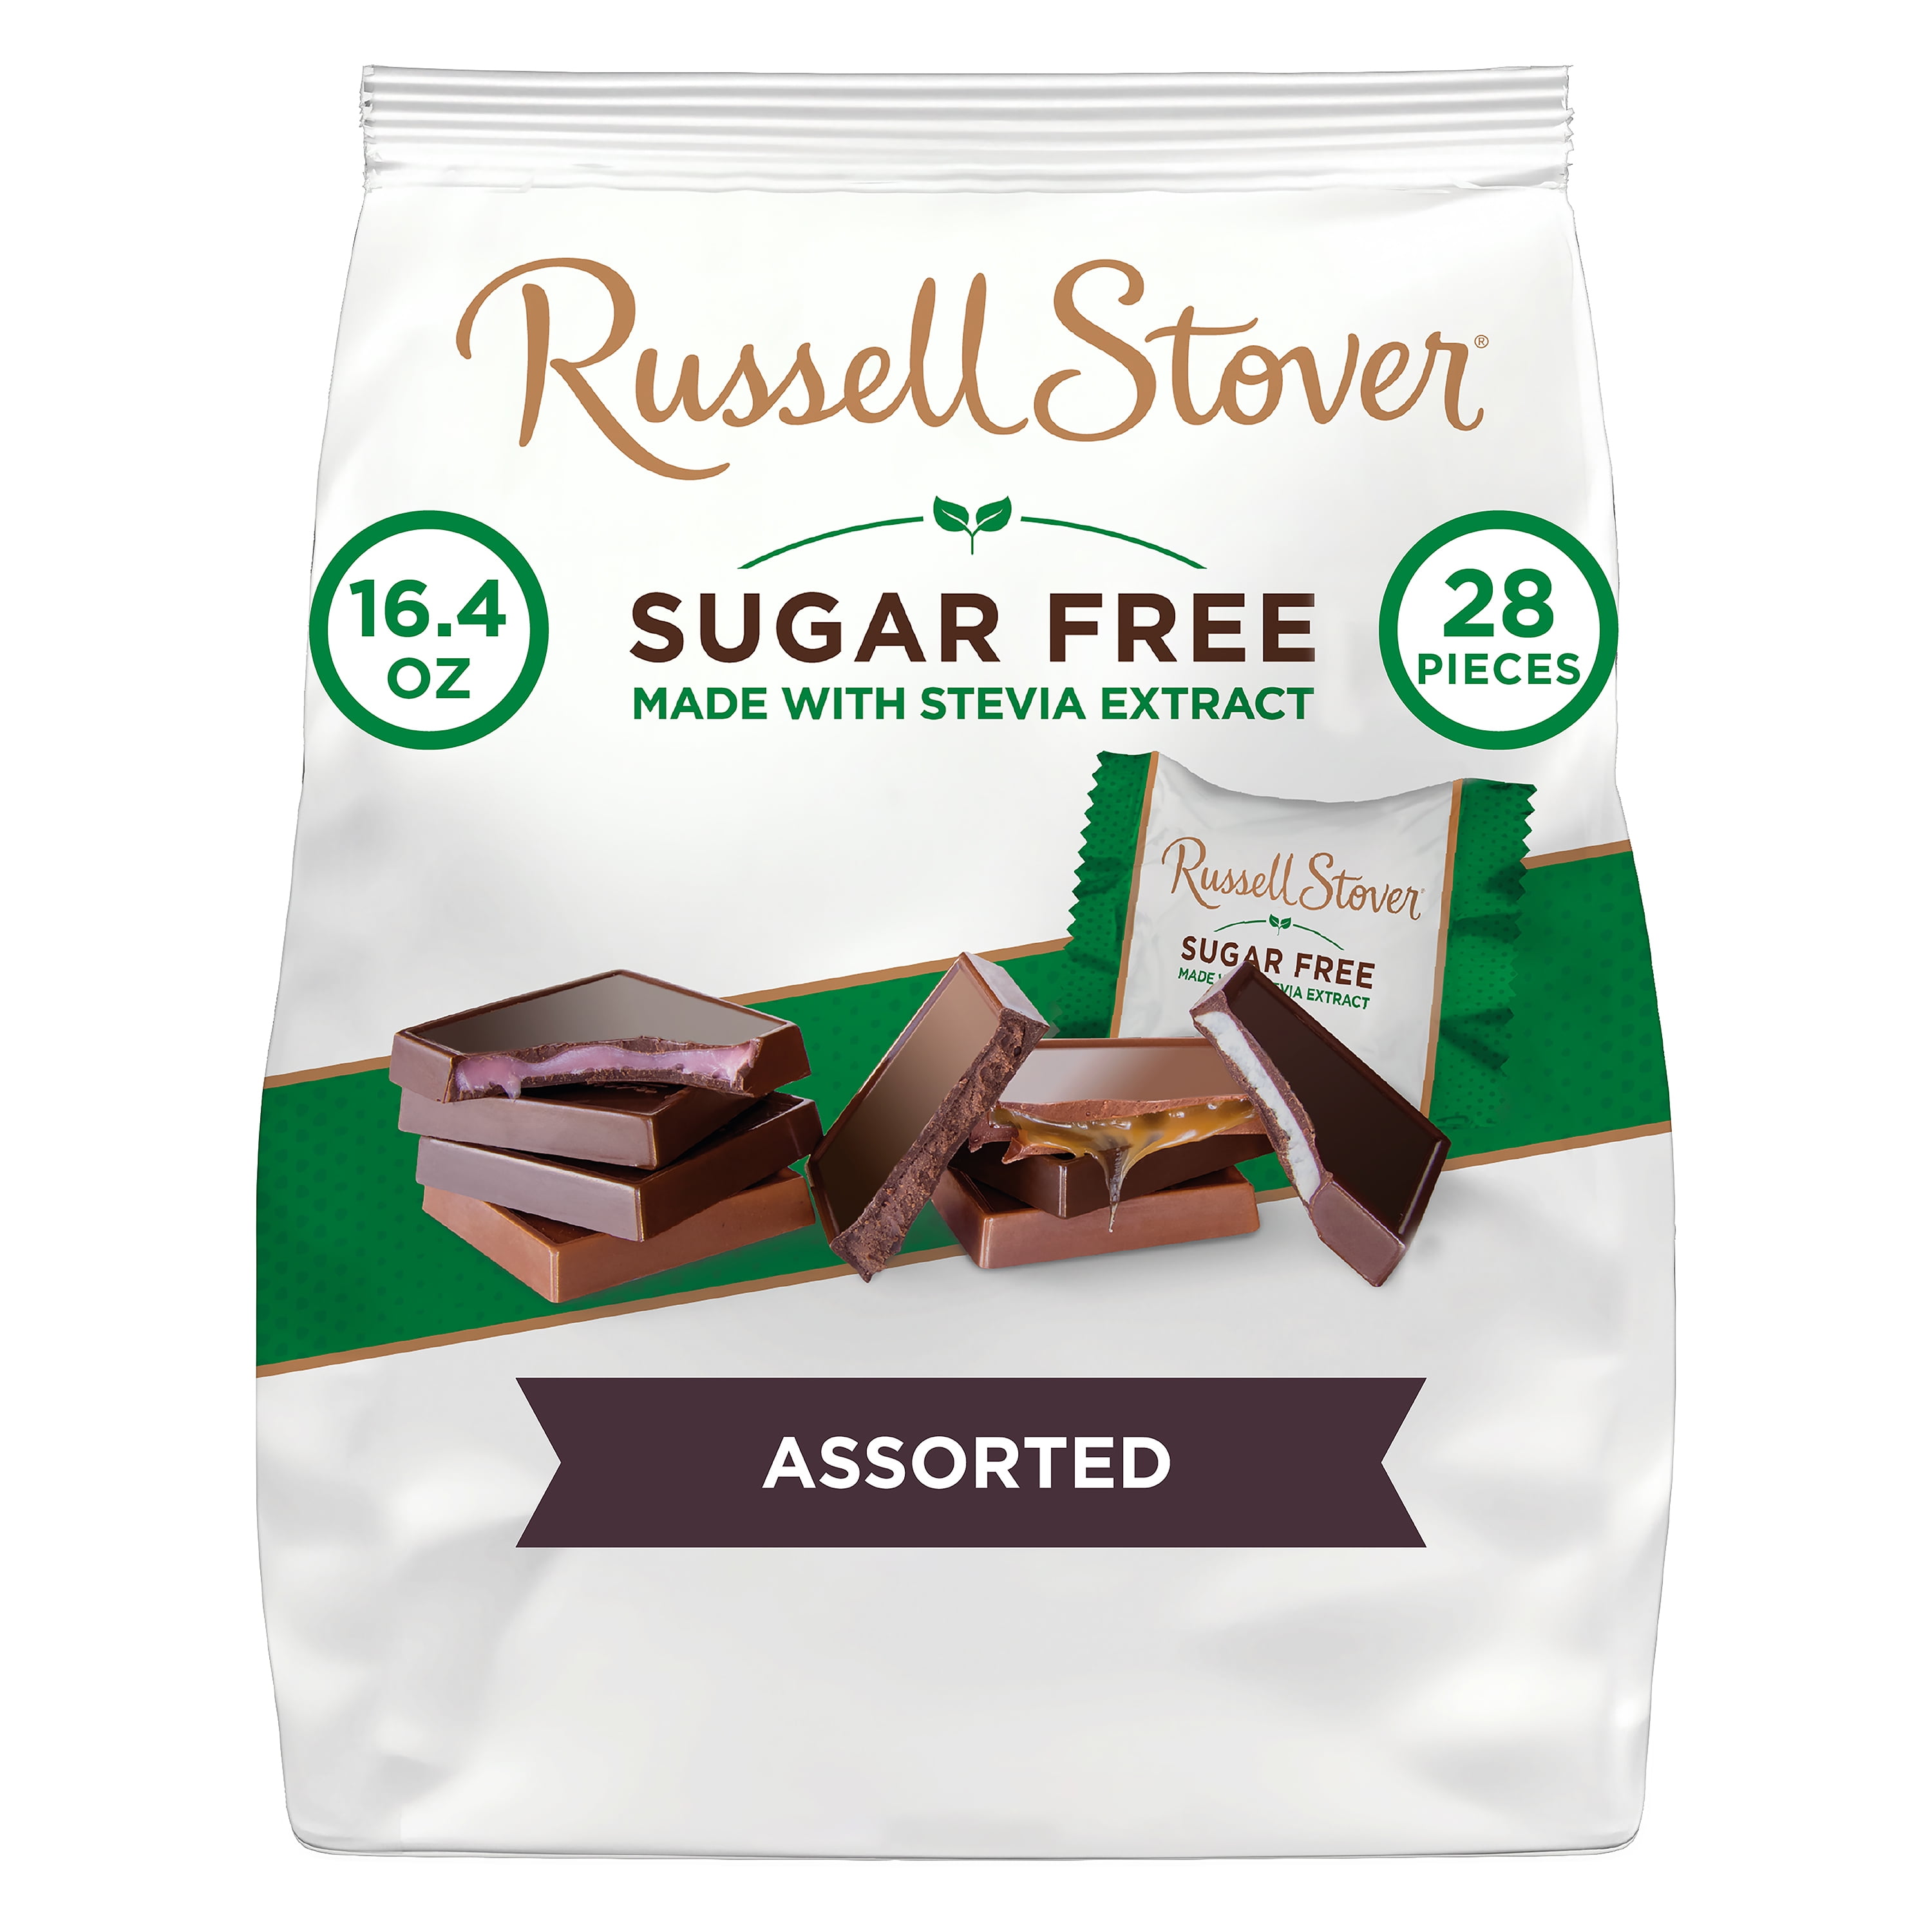 Russell Stover Sugar Free Assortment with Stevia, 16.4 oz. Bag